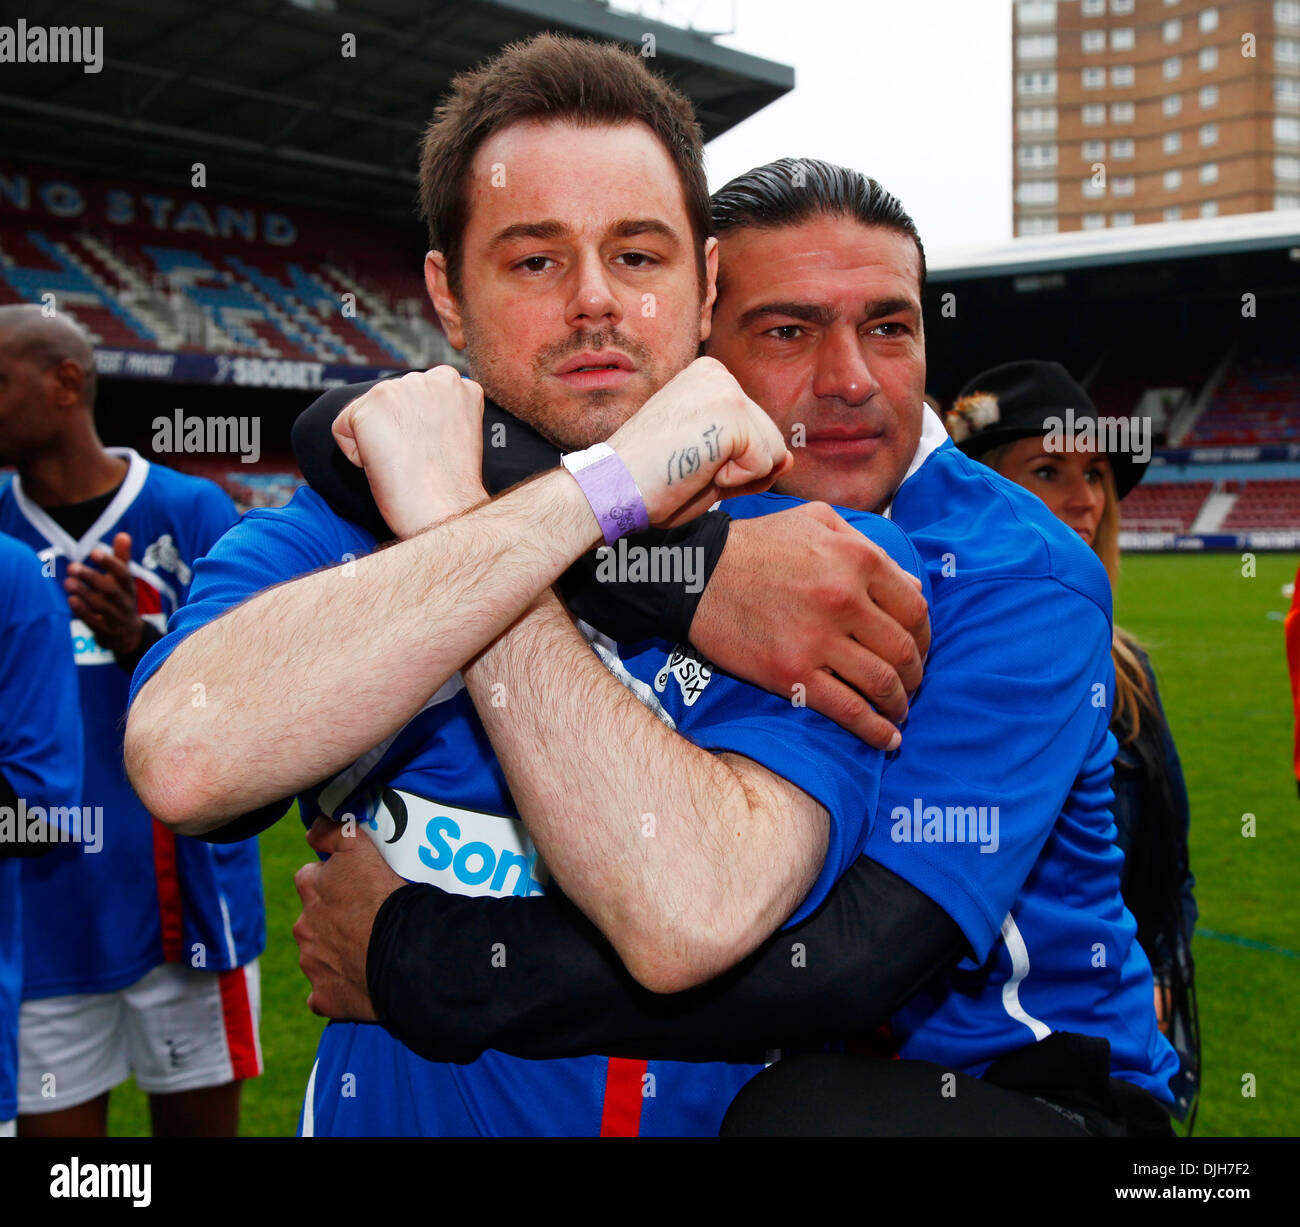 Danny Dyer and Tamer Hassan Celebrity Soccer Six match held at West Ham Football Club grounds in Upton Park London England - Stock Photo